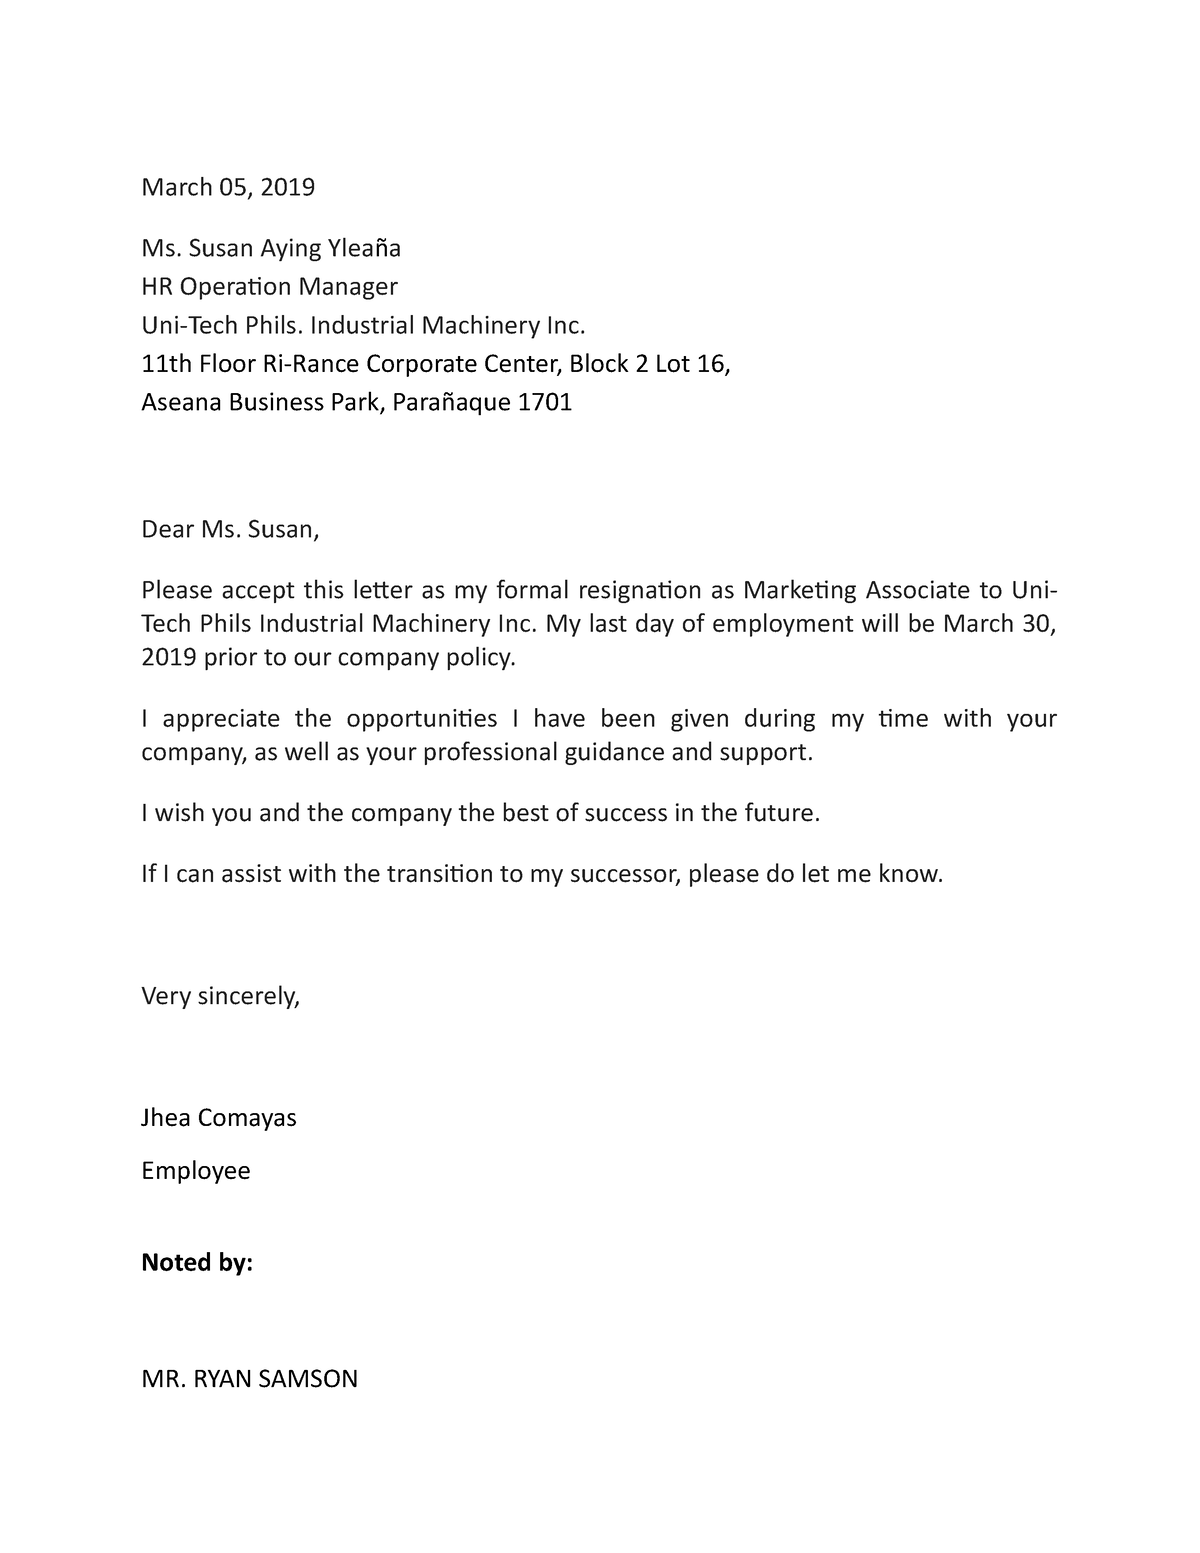 Resignation Letter for Company fo future references - March 05, 2019 Ms ...